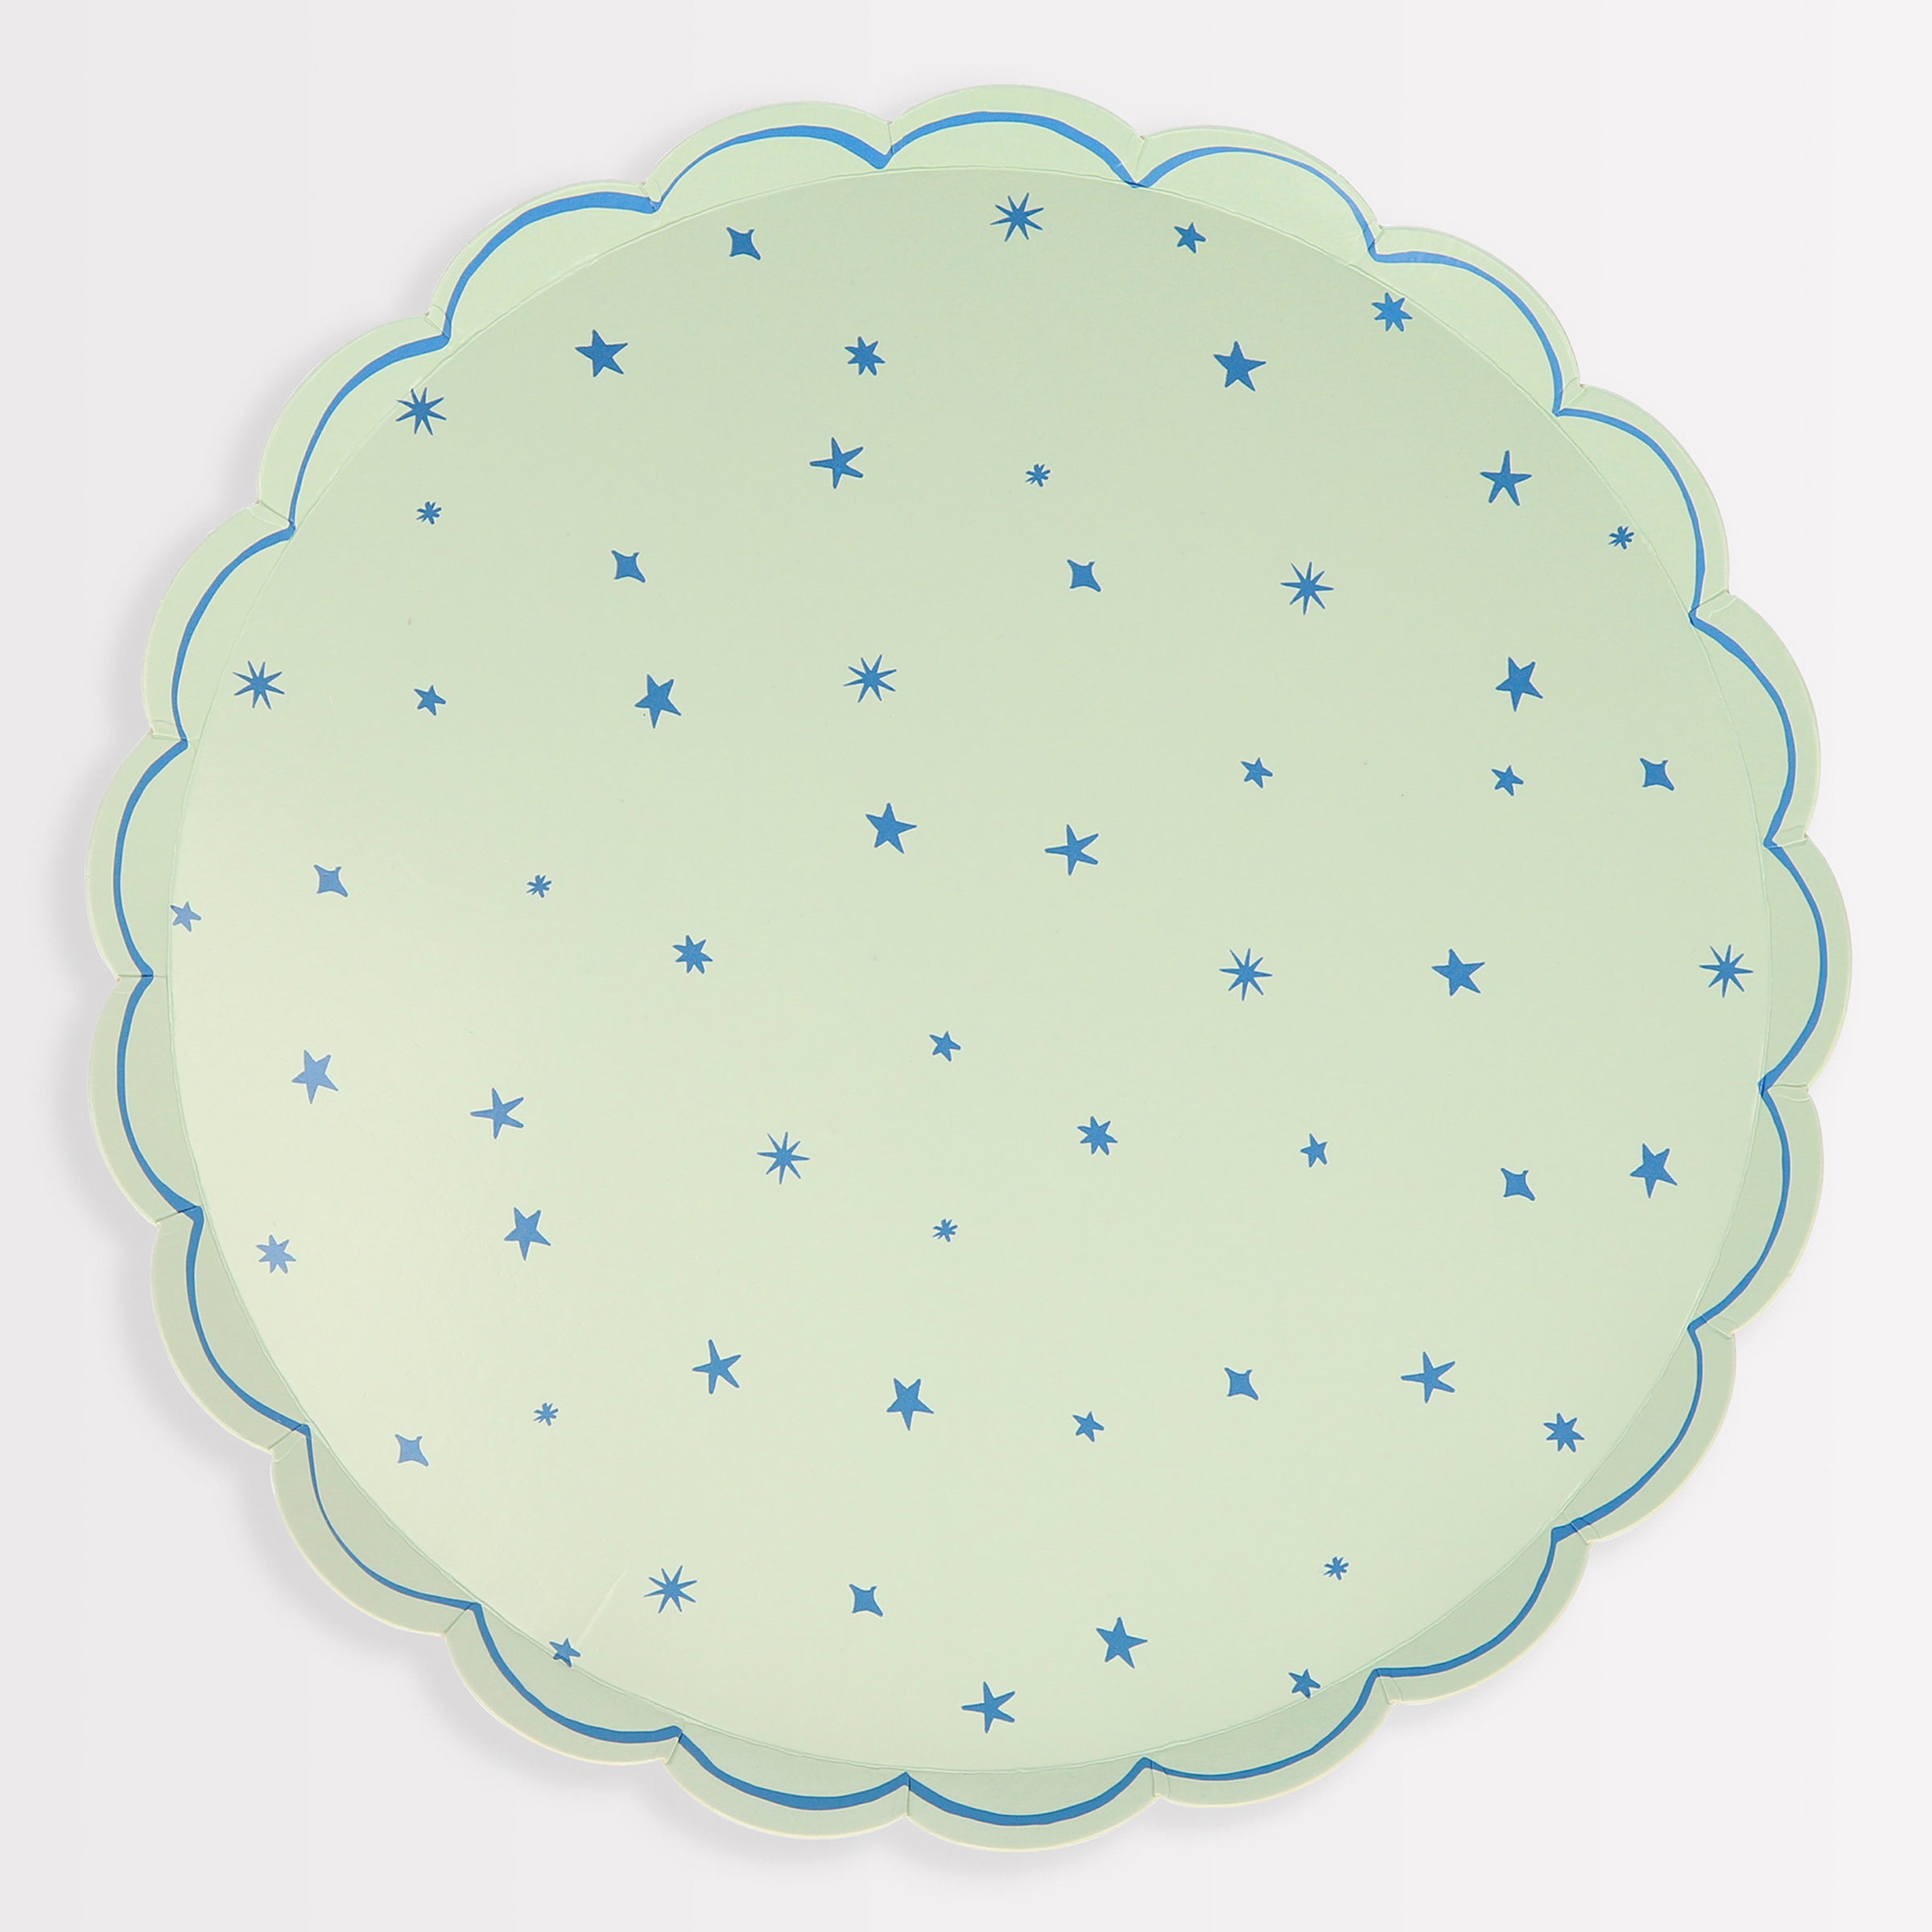 Our star plates, in a set with pink plates, blue plates and mint plates, are the perfect party plates for a kids birthday party.